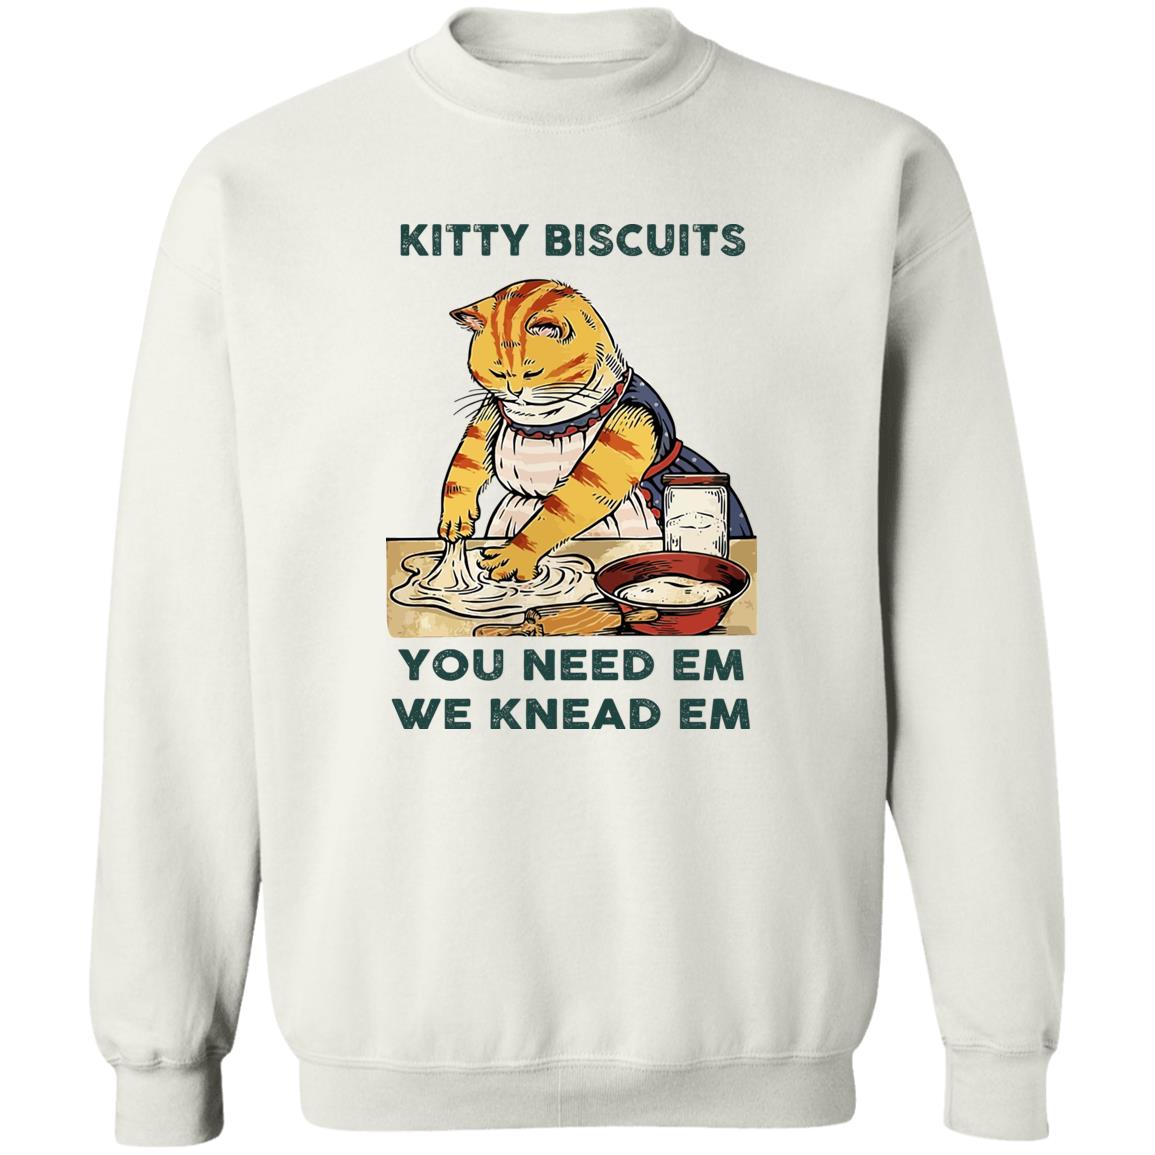 Cat Kitty Biscuits You Need Em We Knead Em Shirt 2